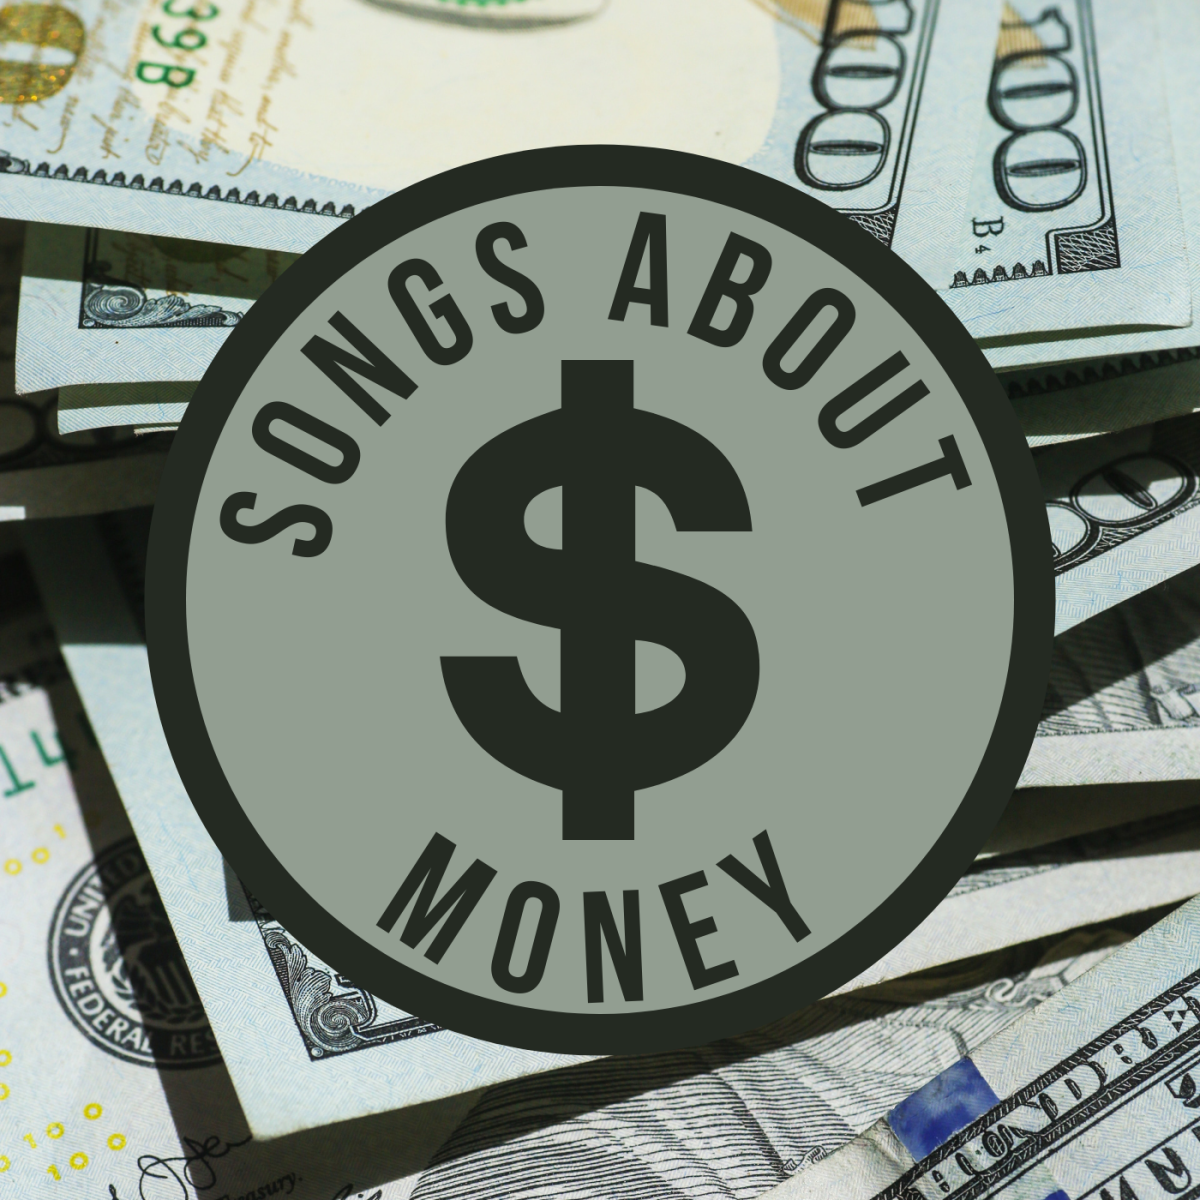 We all need money to survive in this world. Make your own playlist about cash, the almighty dollar, and dreams about being rich. We've got a big list of pop, rock, and country favorites to get you started. Now go make bank.